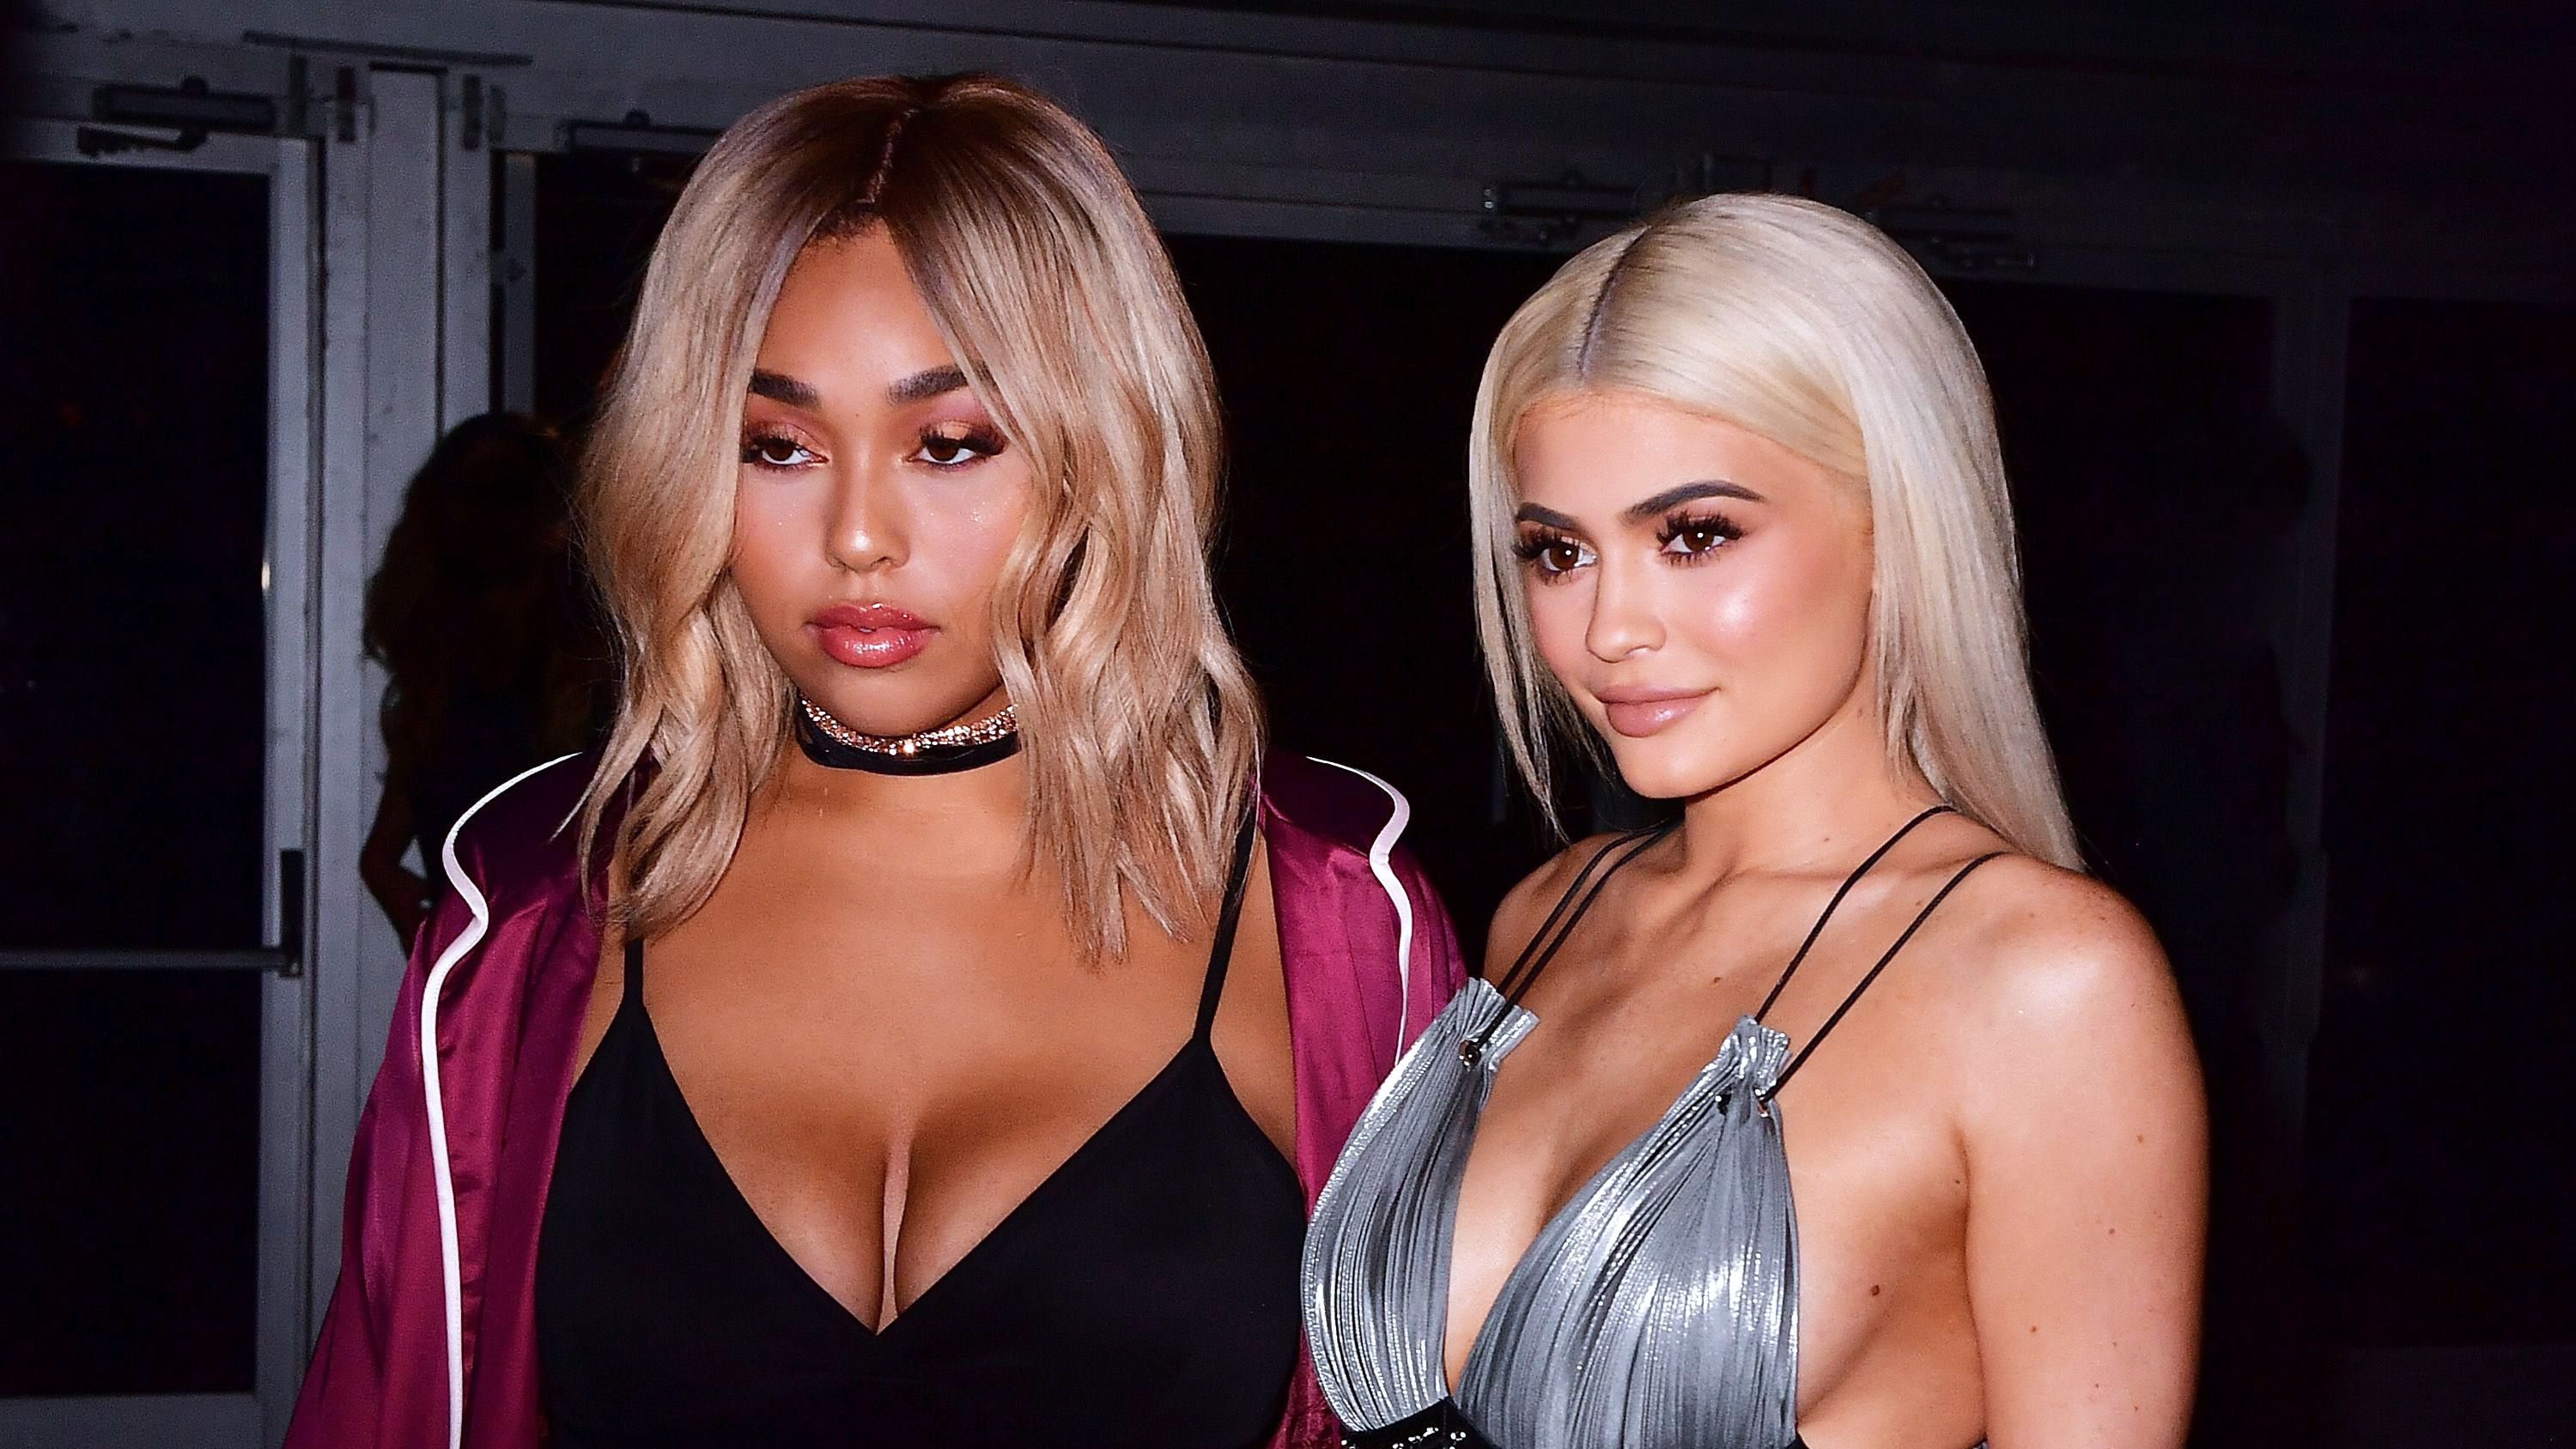 Kylie Jenner's BFF Jordyn Woods On Her Fitness Journey And New